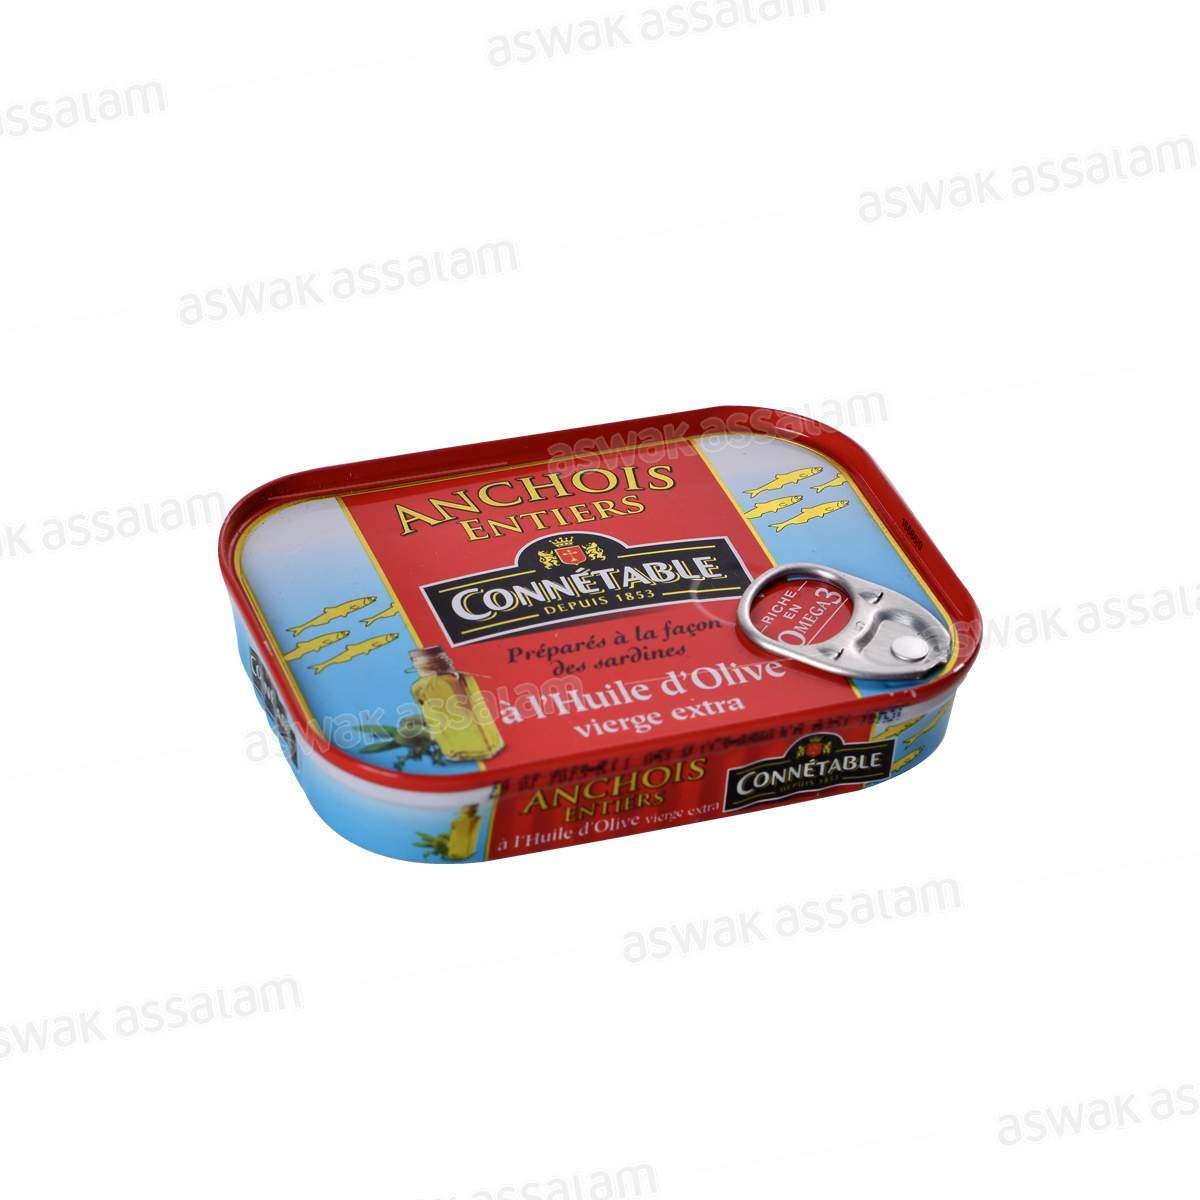 ANCHOIS A L'HUILE D'OLIVE EXTRA VIERGE 100G CONNETABLE